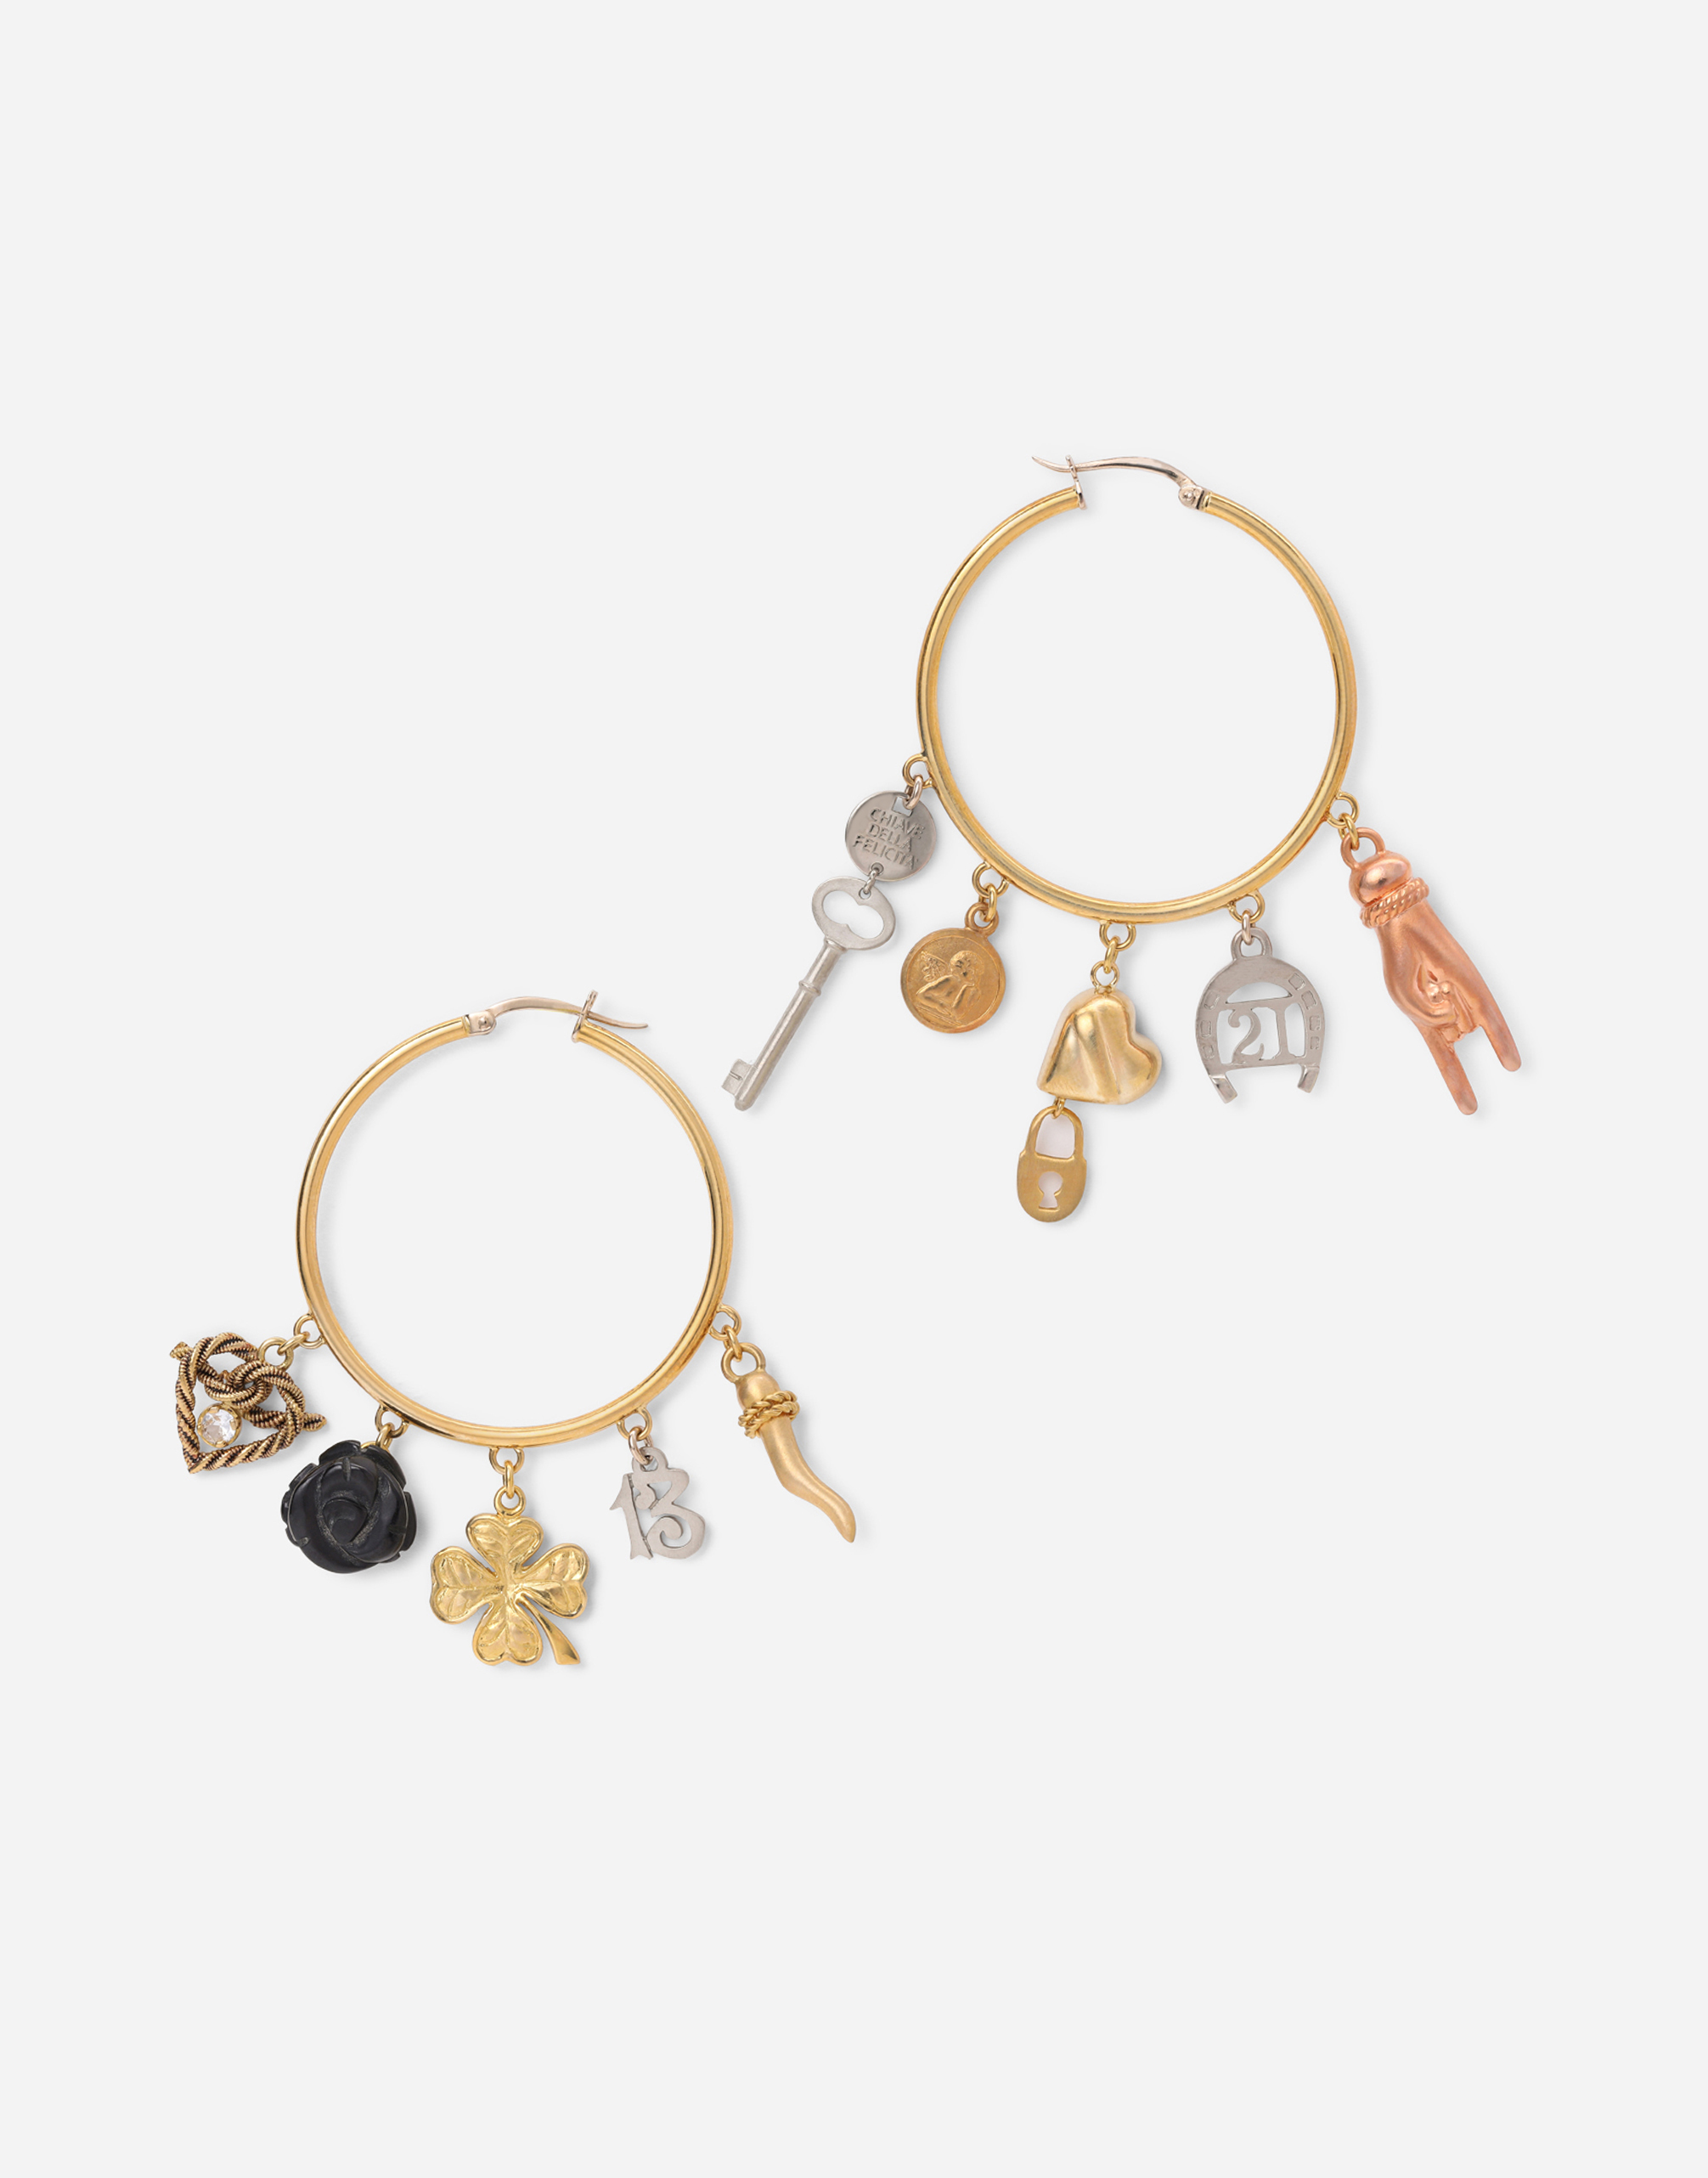 Good Luck earrings in 18kt yellow, white and red gold with lucky charms in Multicolor